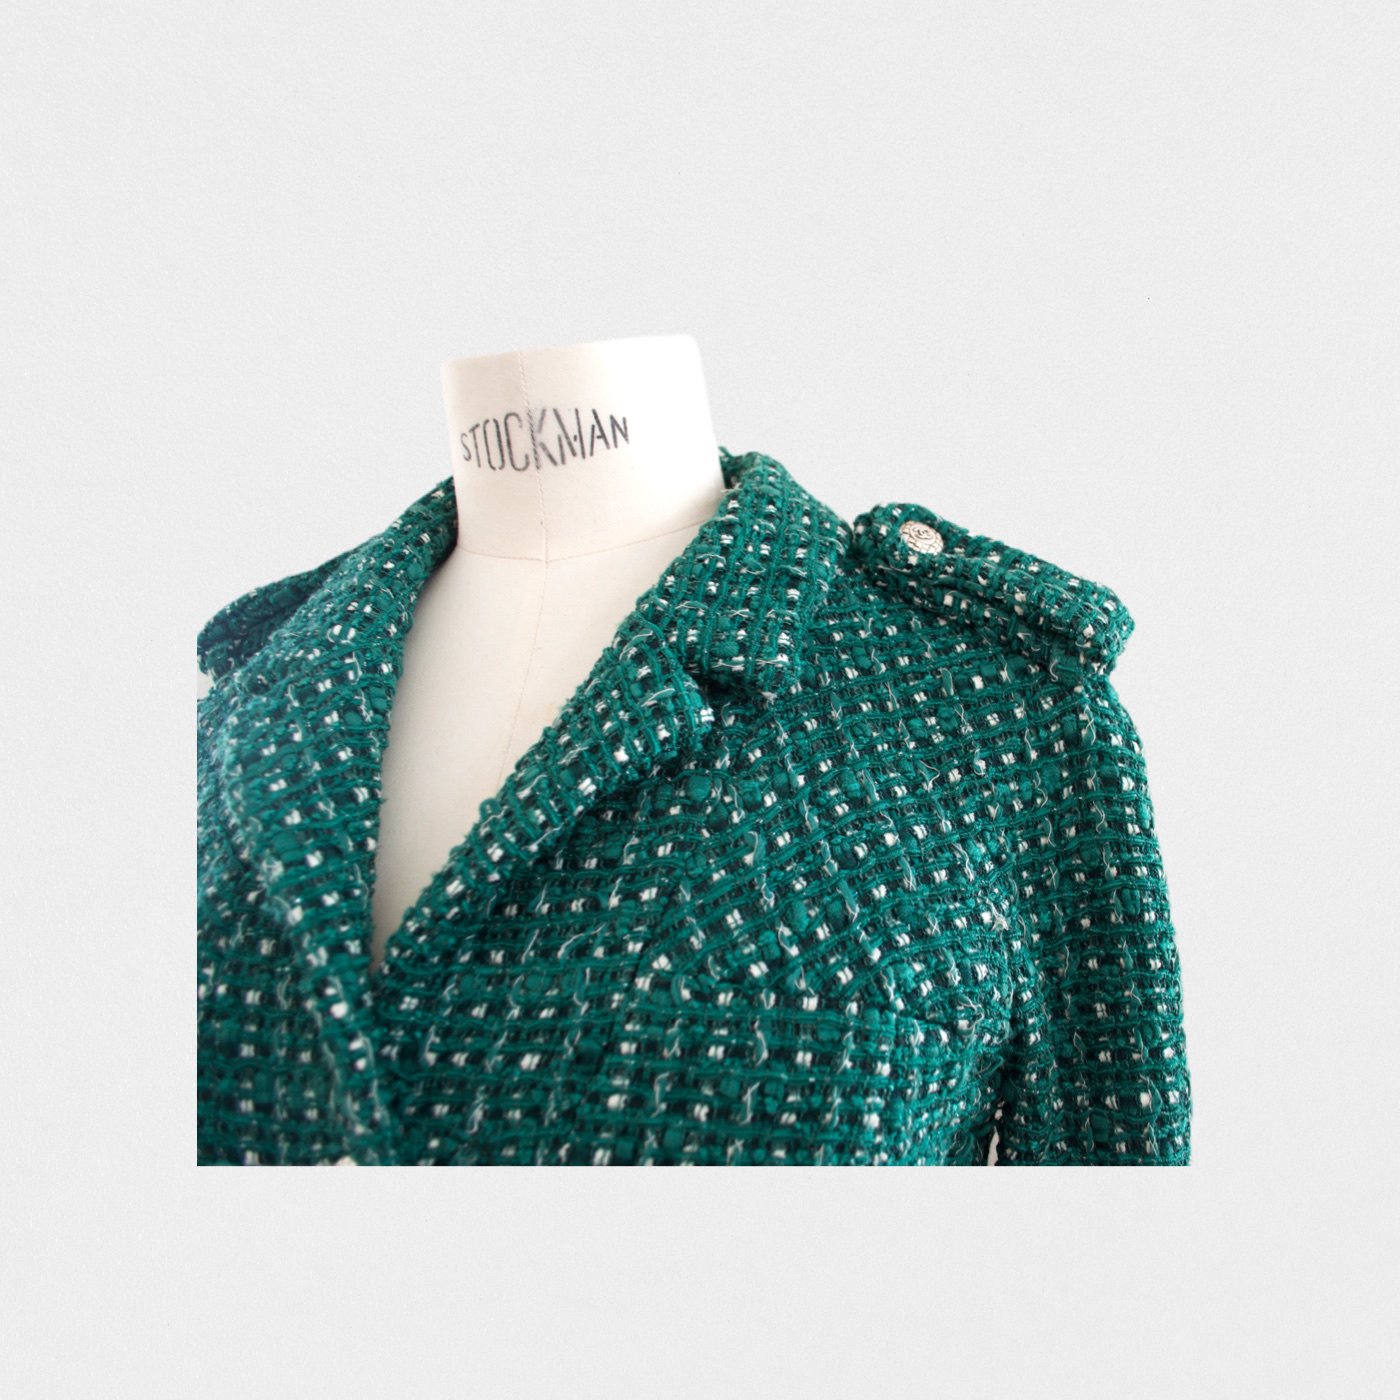 Lysis vintage Chanel green jacket - S - Cruise 2006